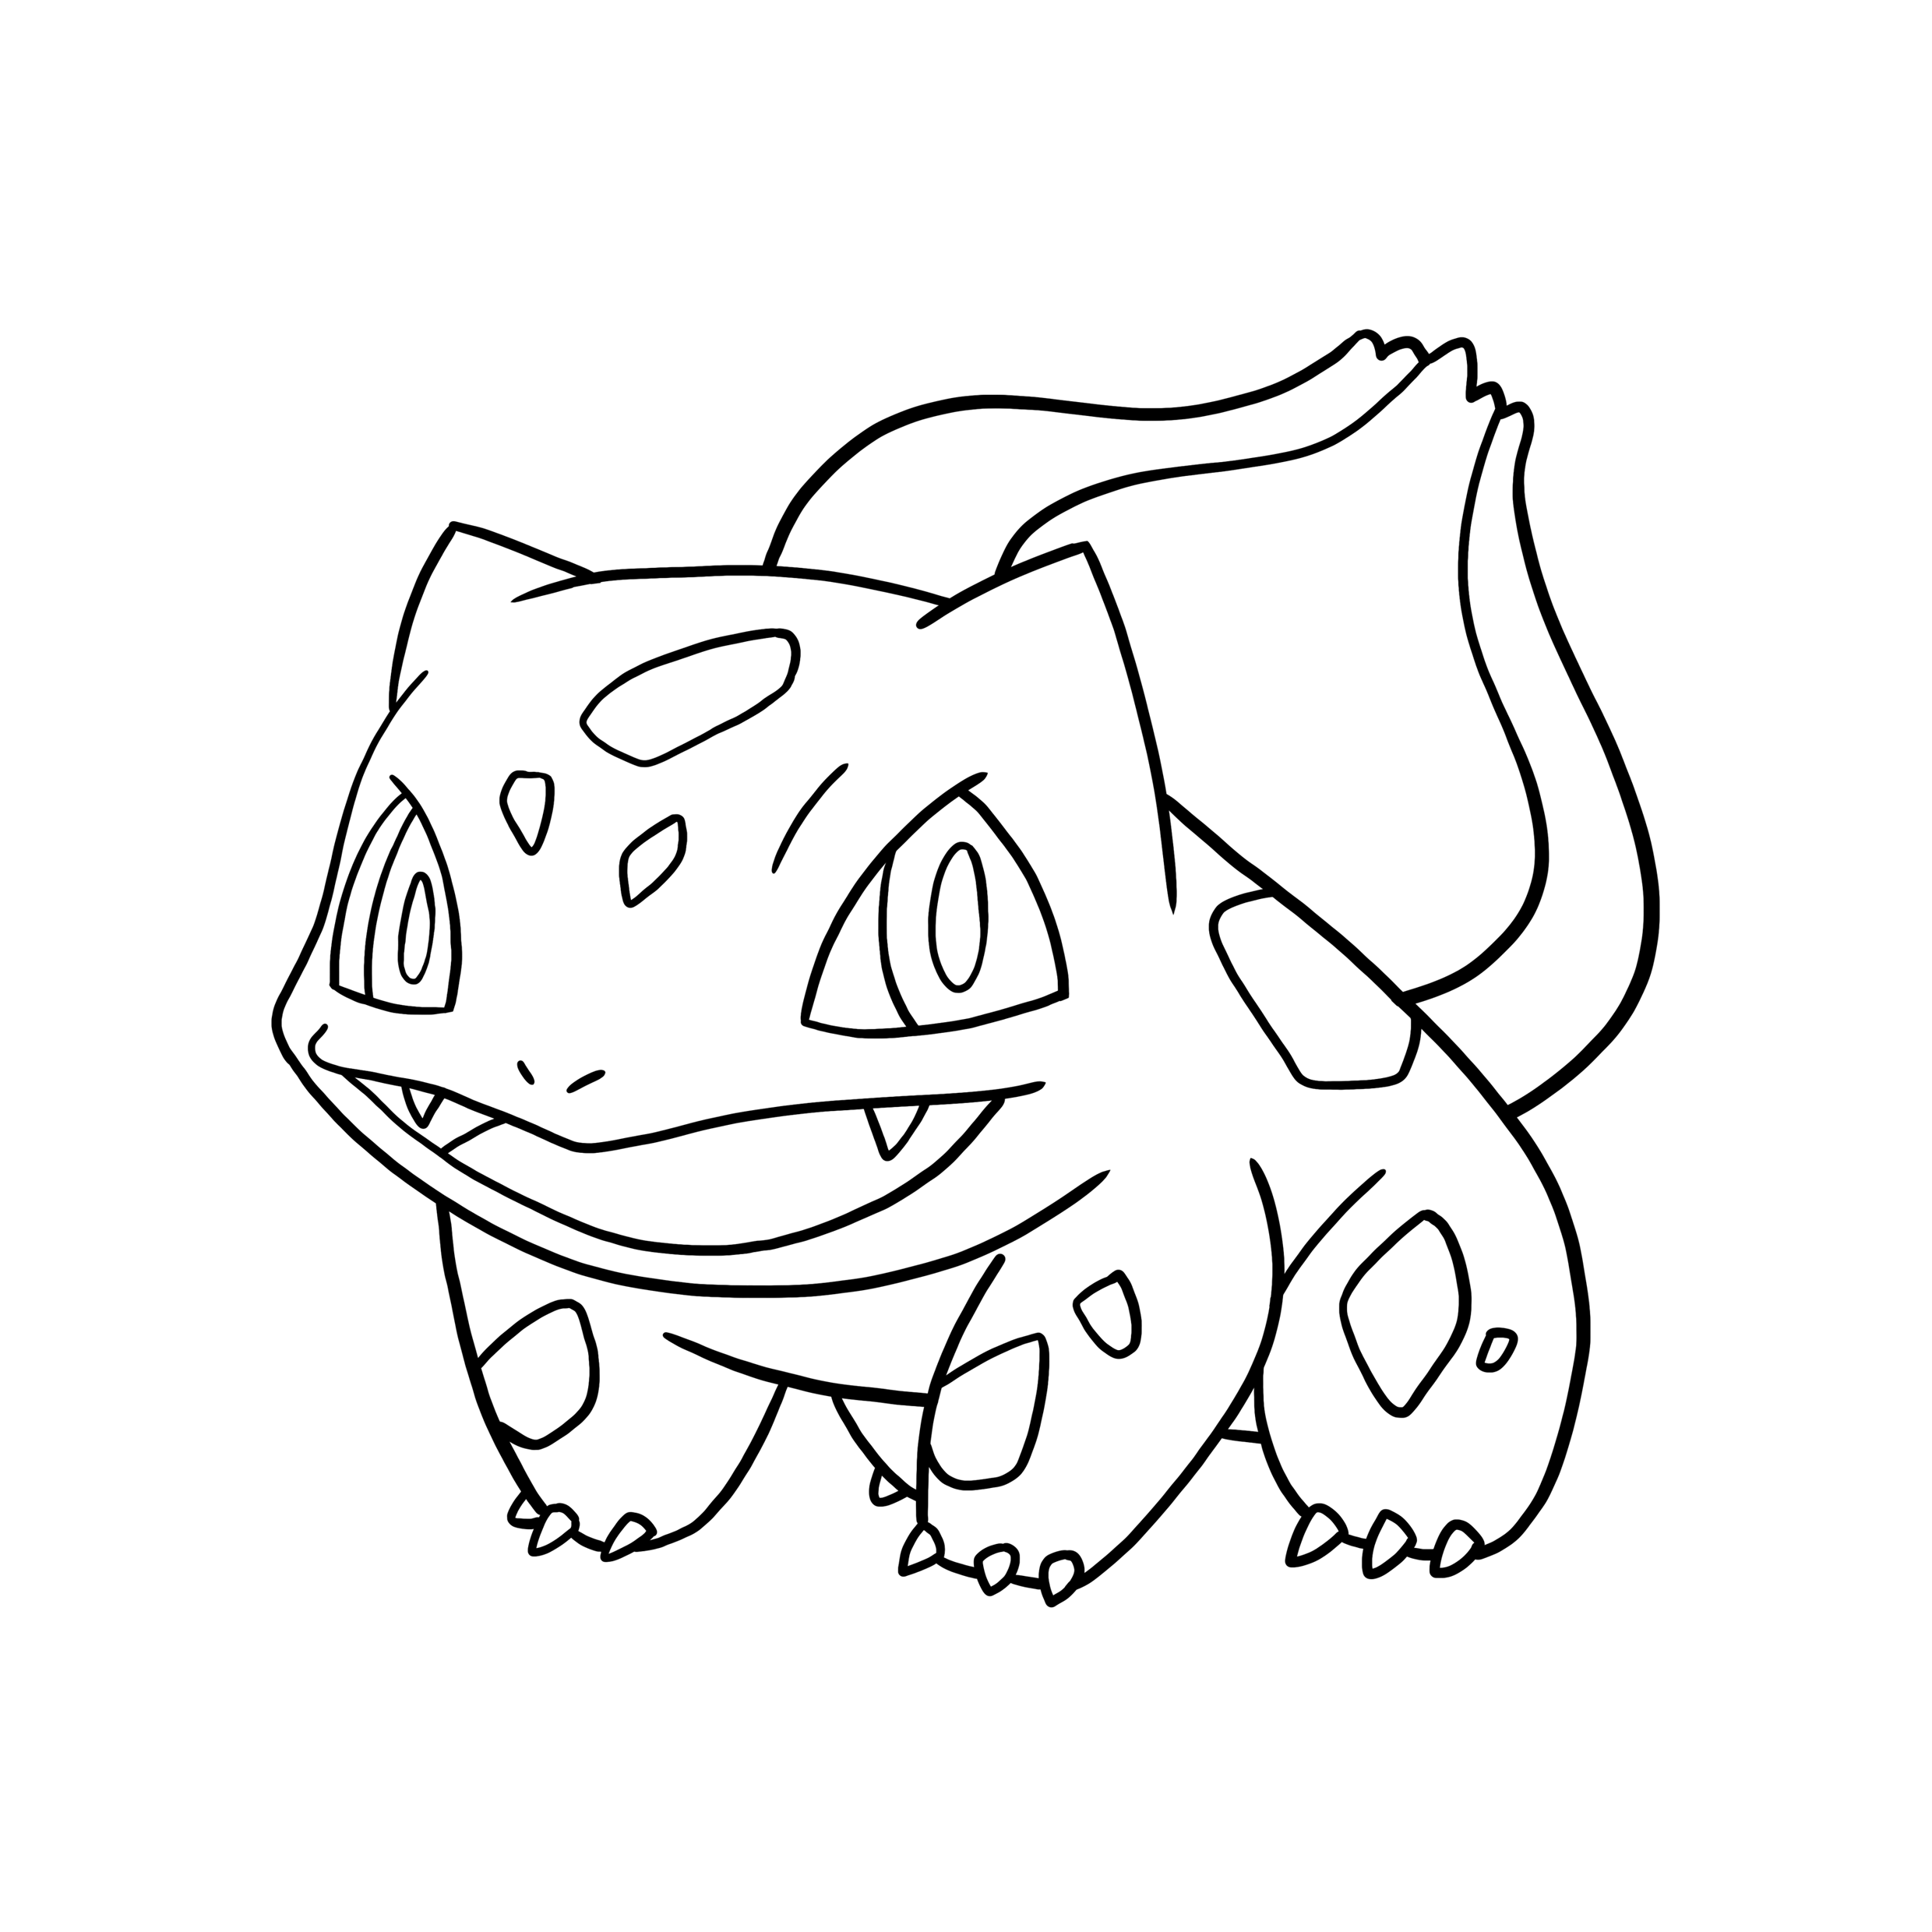 Bulbasaur Coloring Page Pokemon Coloring Pages Pikachu Coloring Page Pokemon Coloring